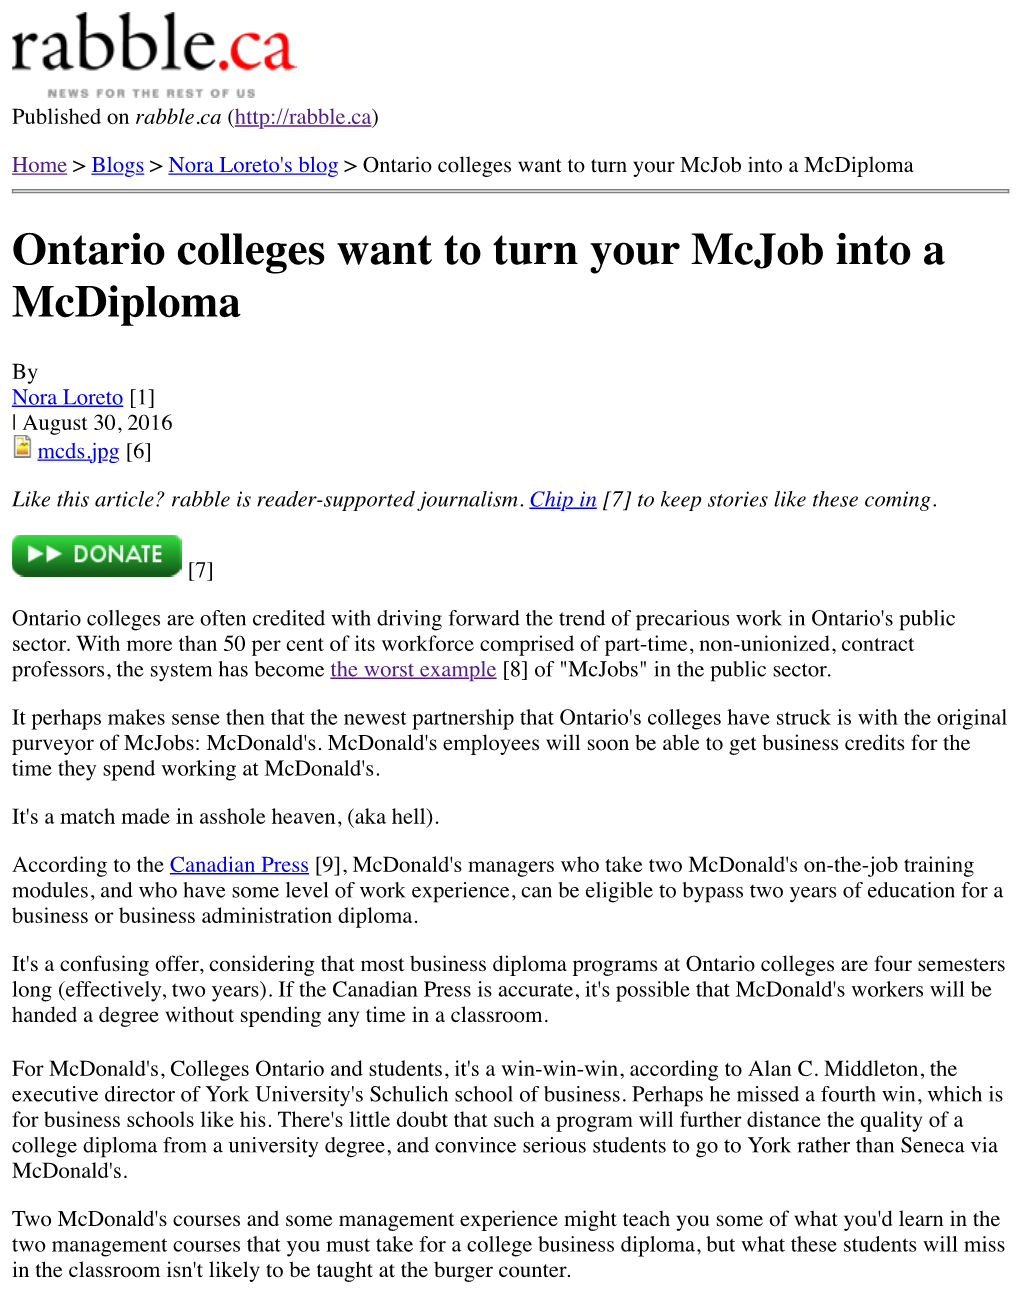 Ontario Colleges Want to Turn Your Mcjob Into a Mcdiploma